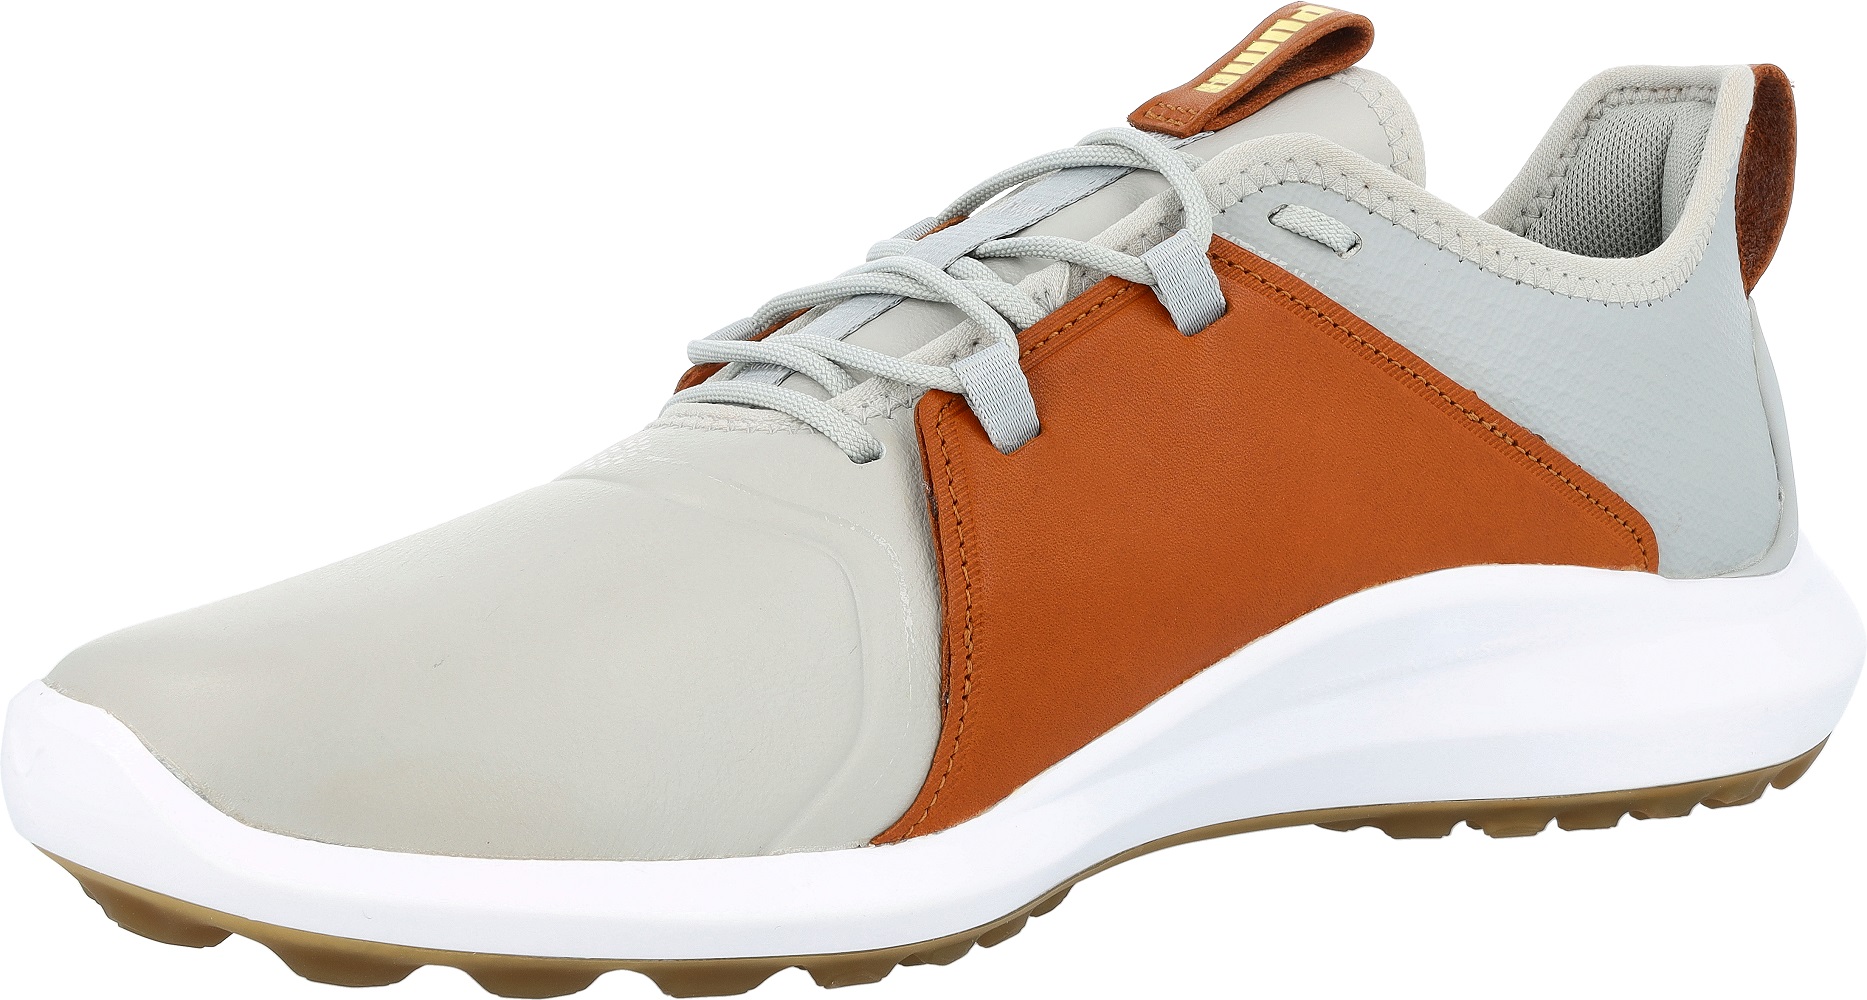 Puma Ignite Fasten8 Crafted Rise/Gold/Brown Men Spikeless Golf Shoes Choose Size - image 4 of 8